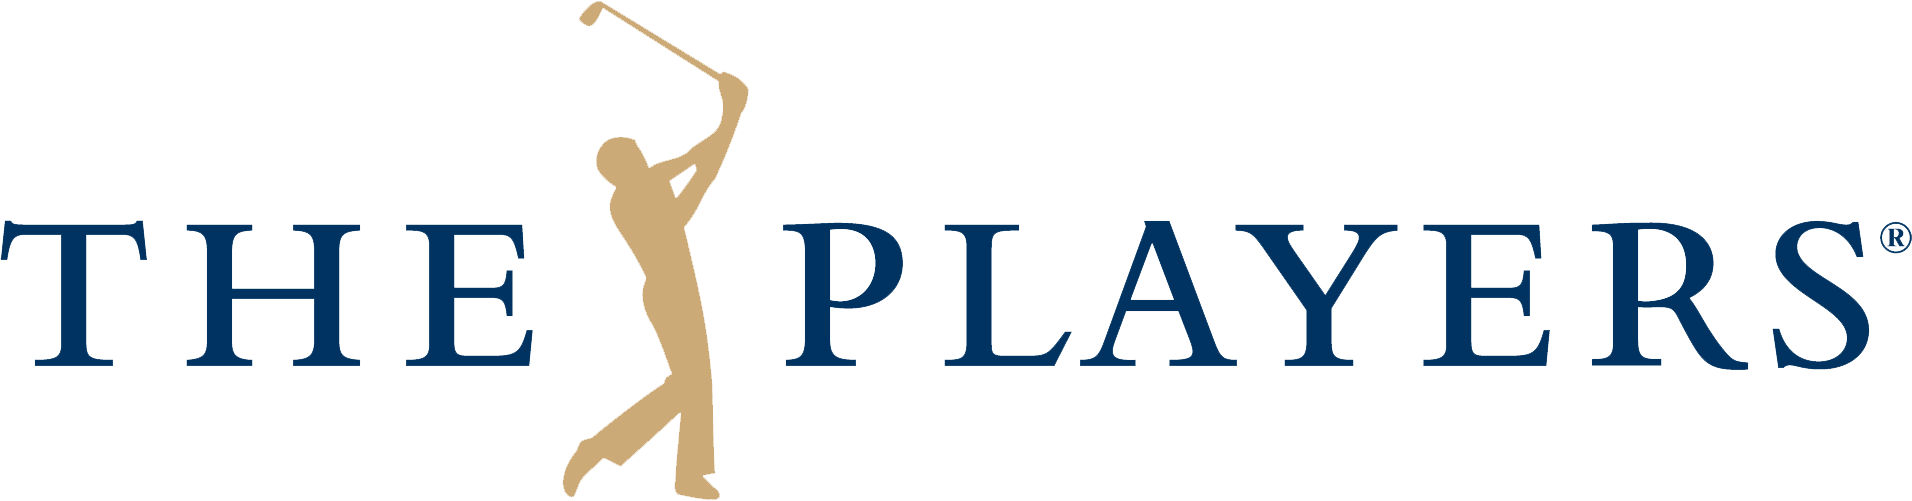 THE-PLAYERS-Championship-LOGO-1.png